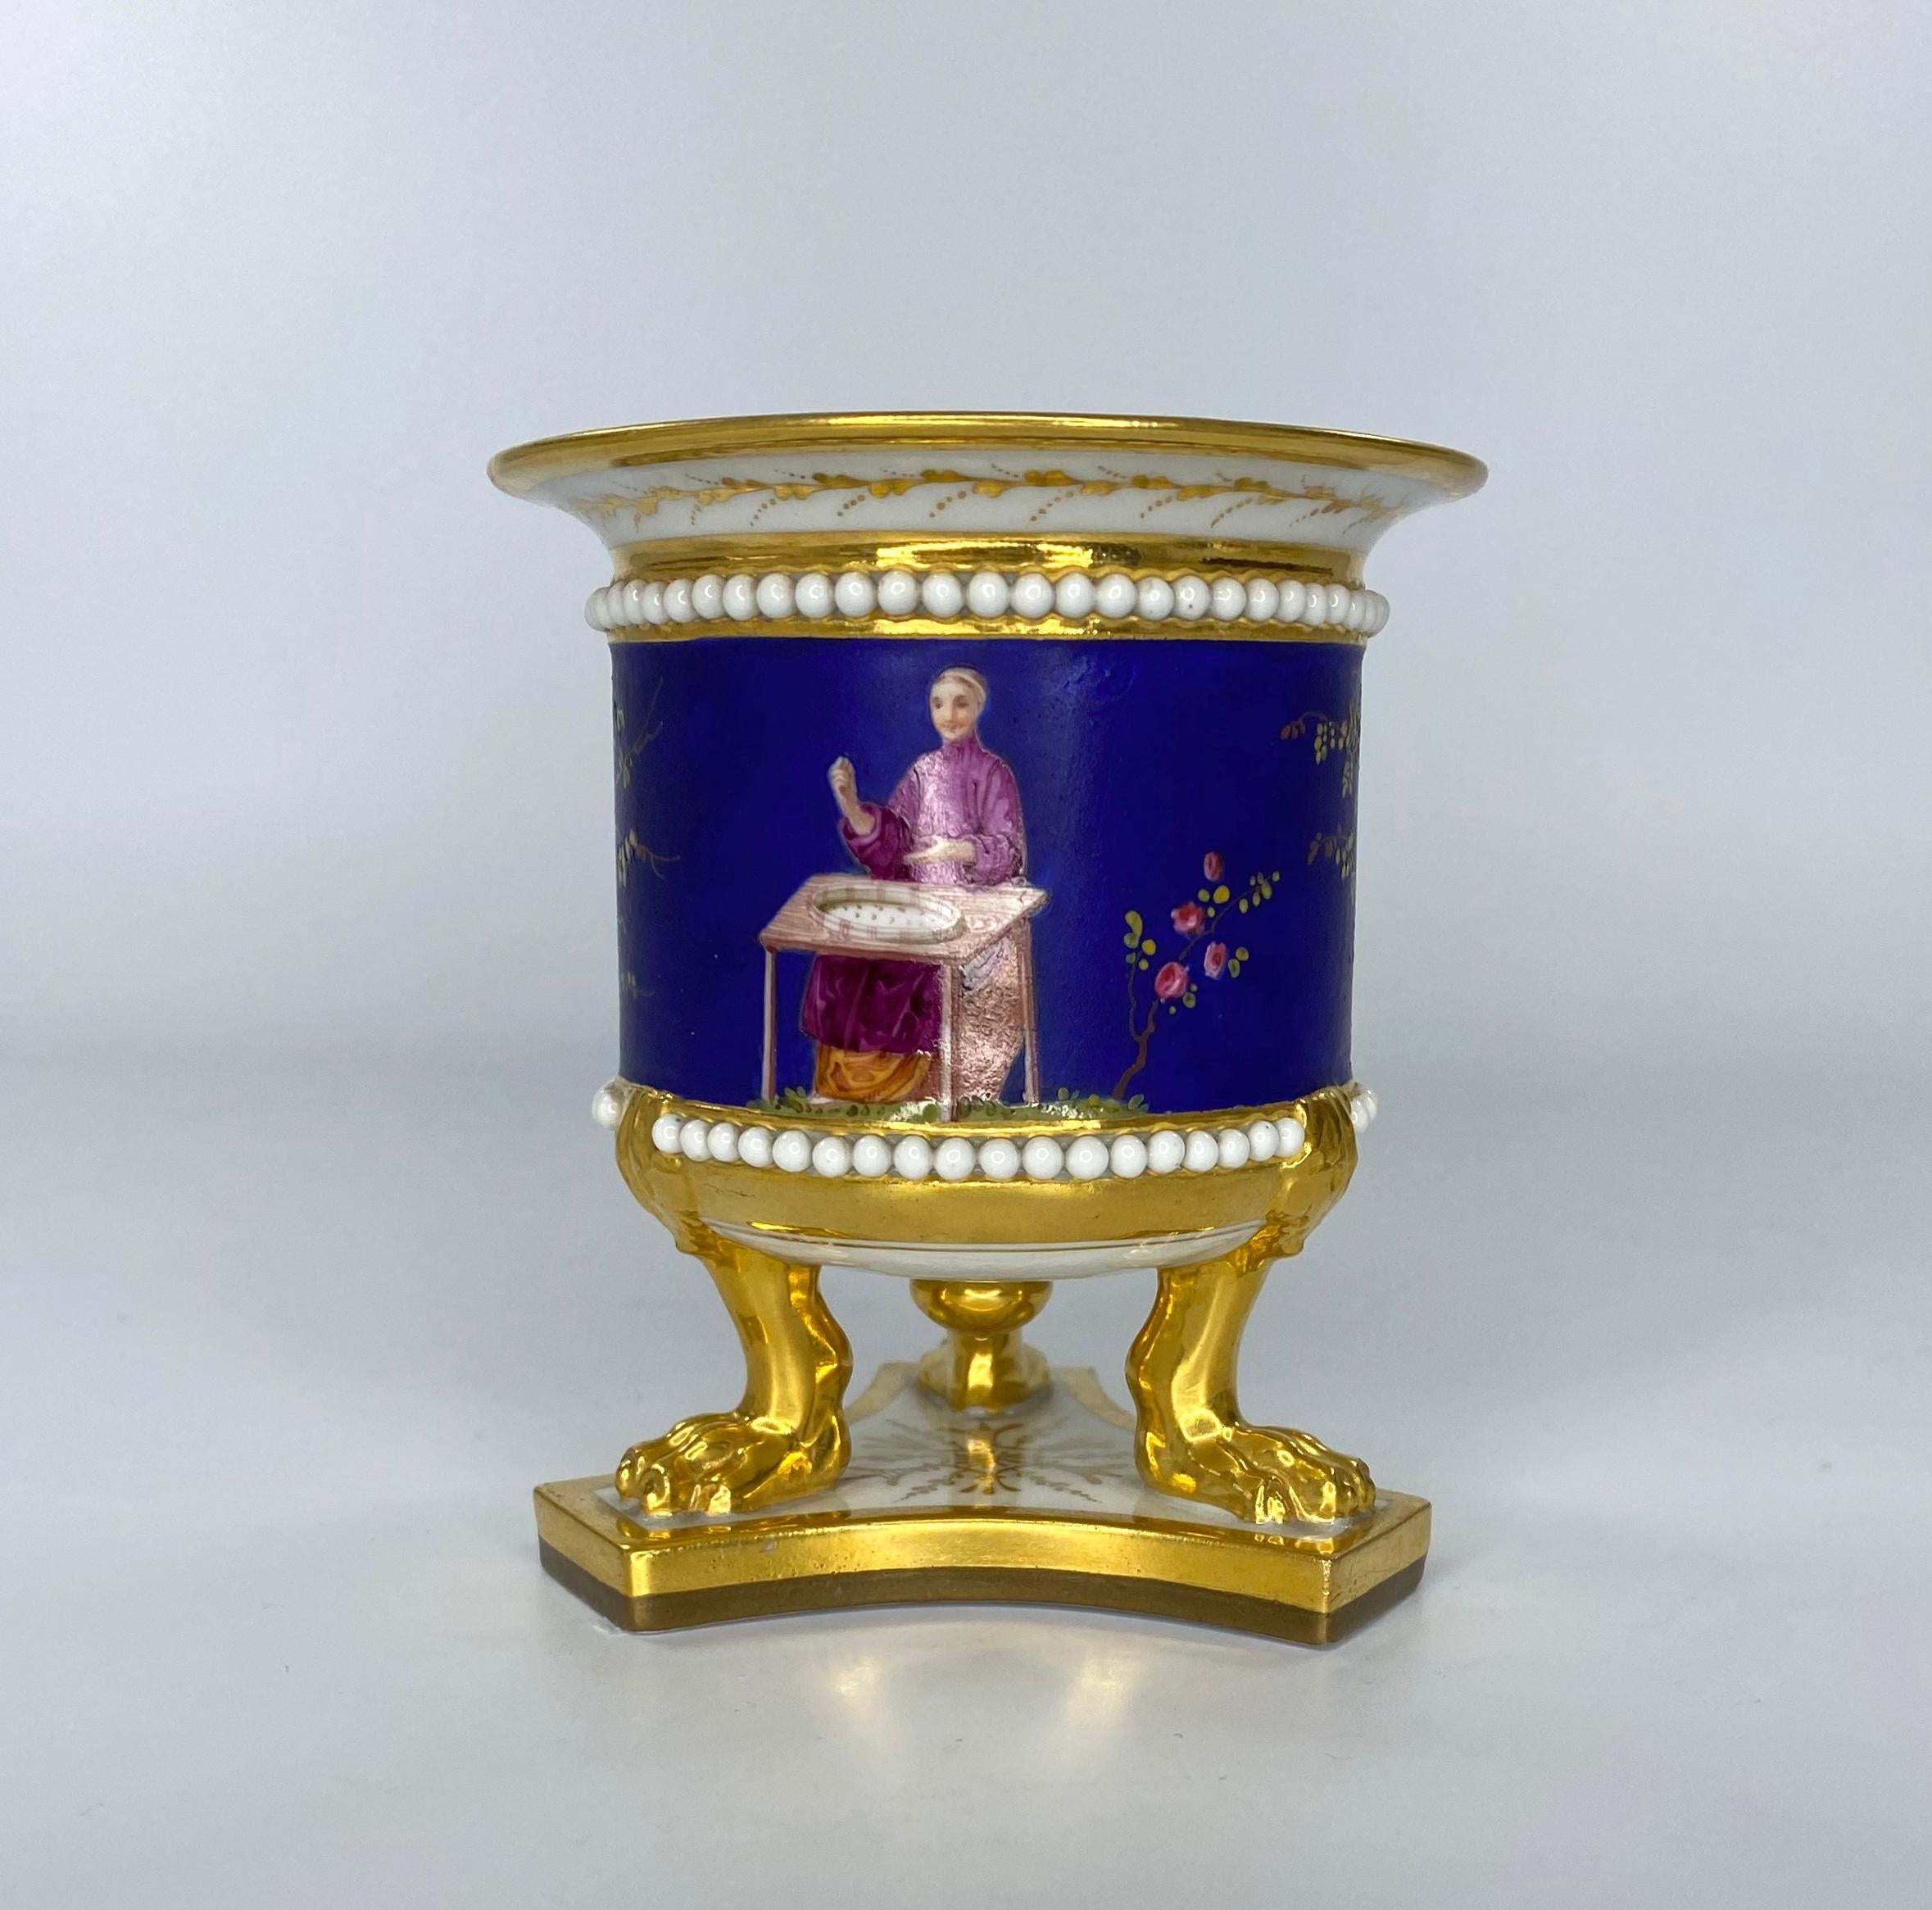 SOLD
Fine Flight Barr & Barr Worcester porcelain urn, c. 1815. The drum shaped urn, unusually painted with a Chinoiserie scene of people in Chinese costume seated at tables, working with textiles, between flowering plants, on a Matt blue